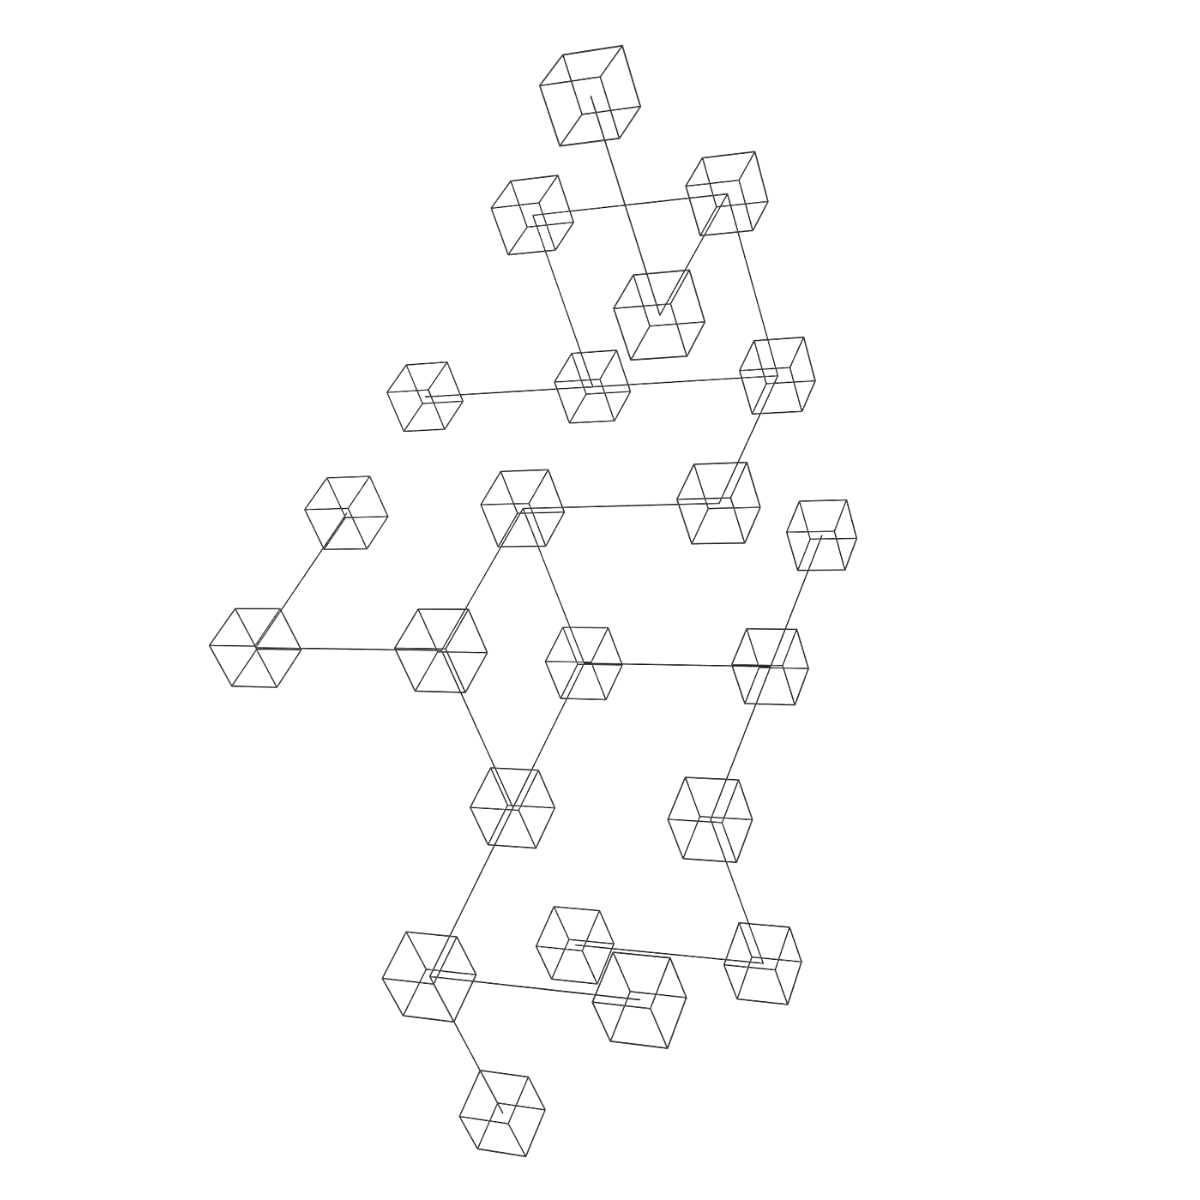 Line drawing of many cubes connected by short sticks to each other to form a model.